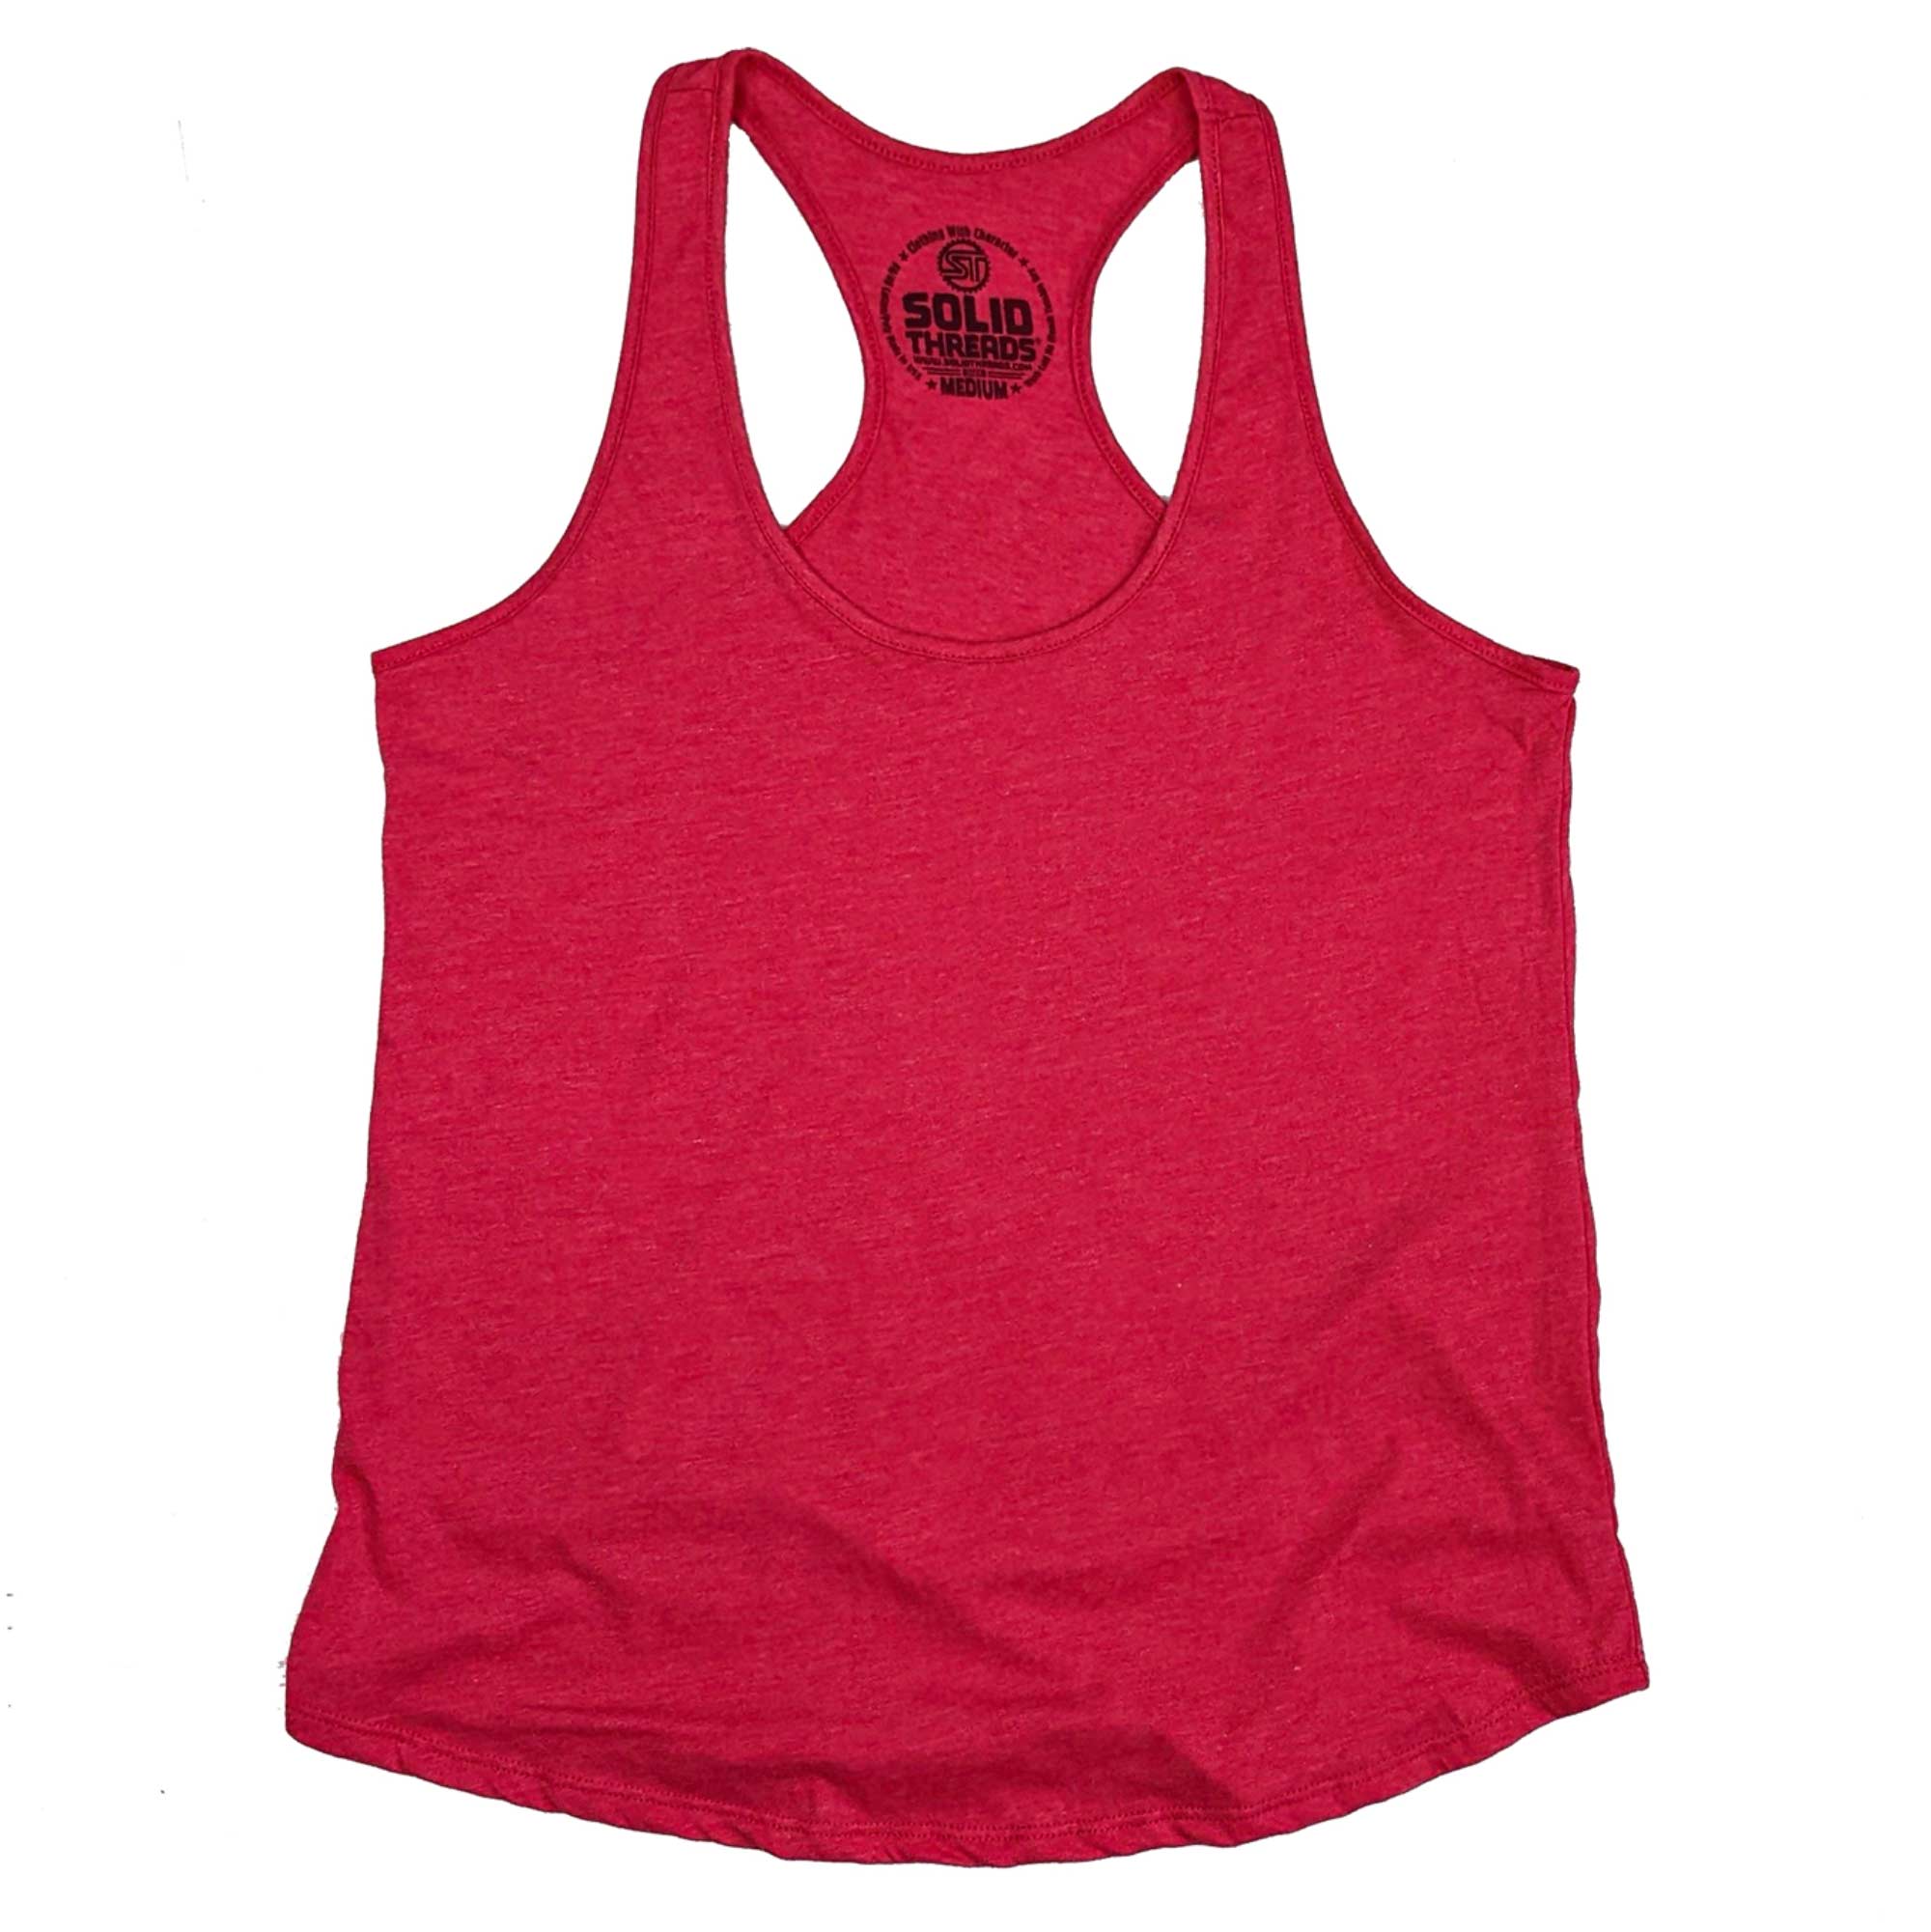 Women's Solid Threads Red Tank Top | Vintage Inspired USA Made Tee